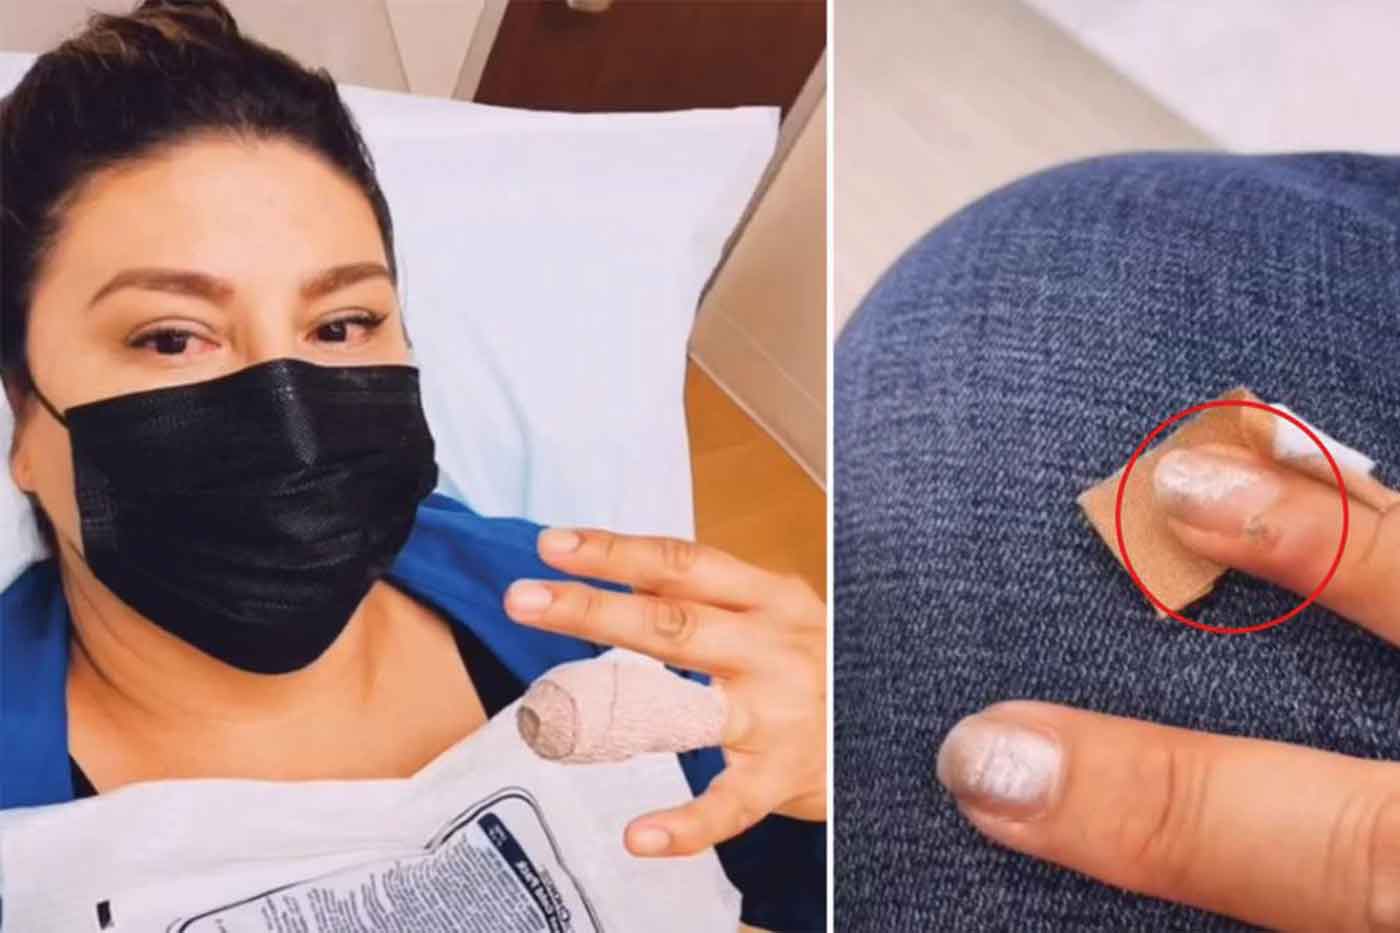 US-based woman diagnosed with skin cancer after aggressive manicure